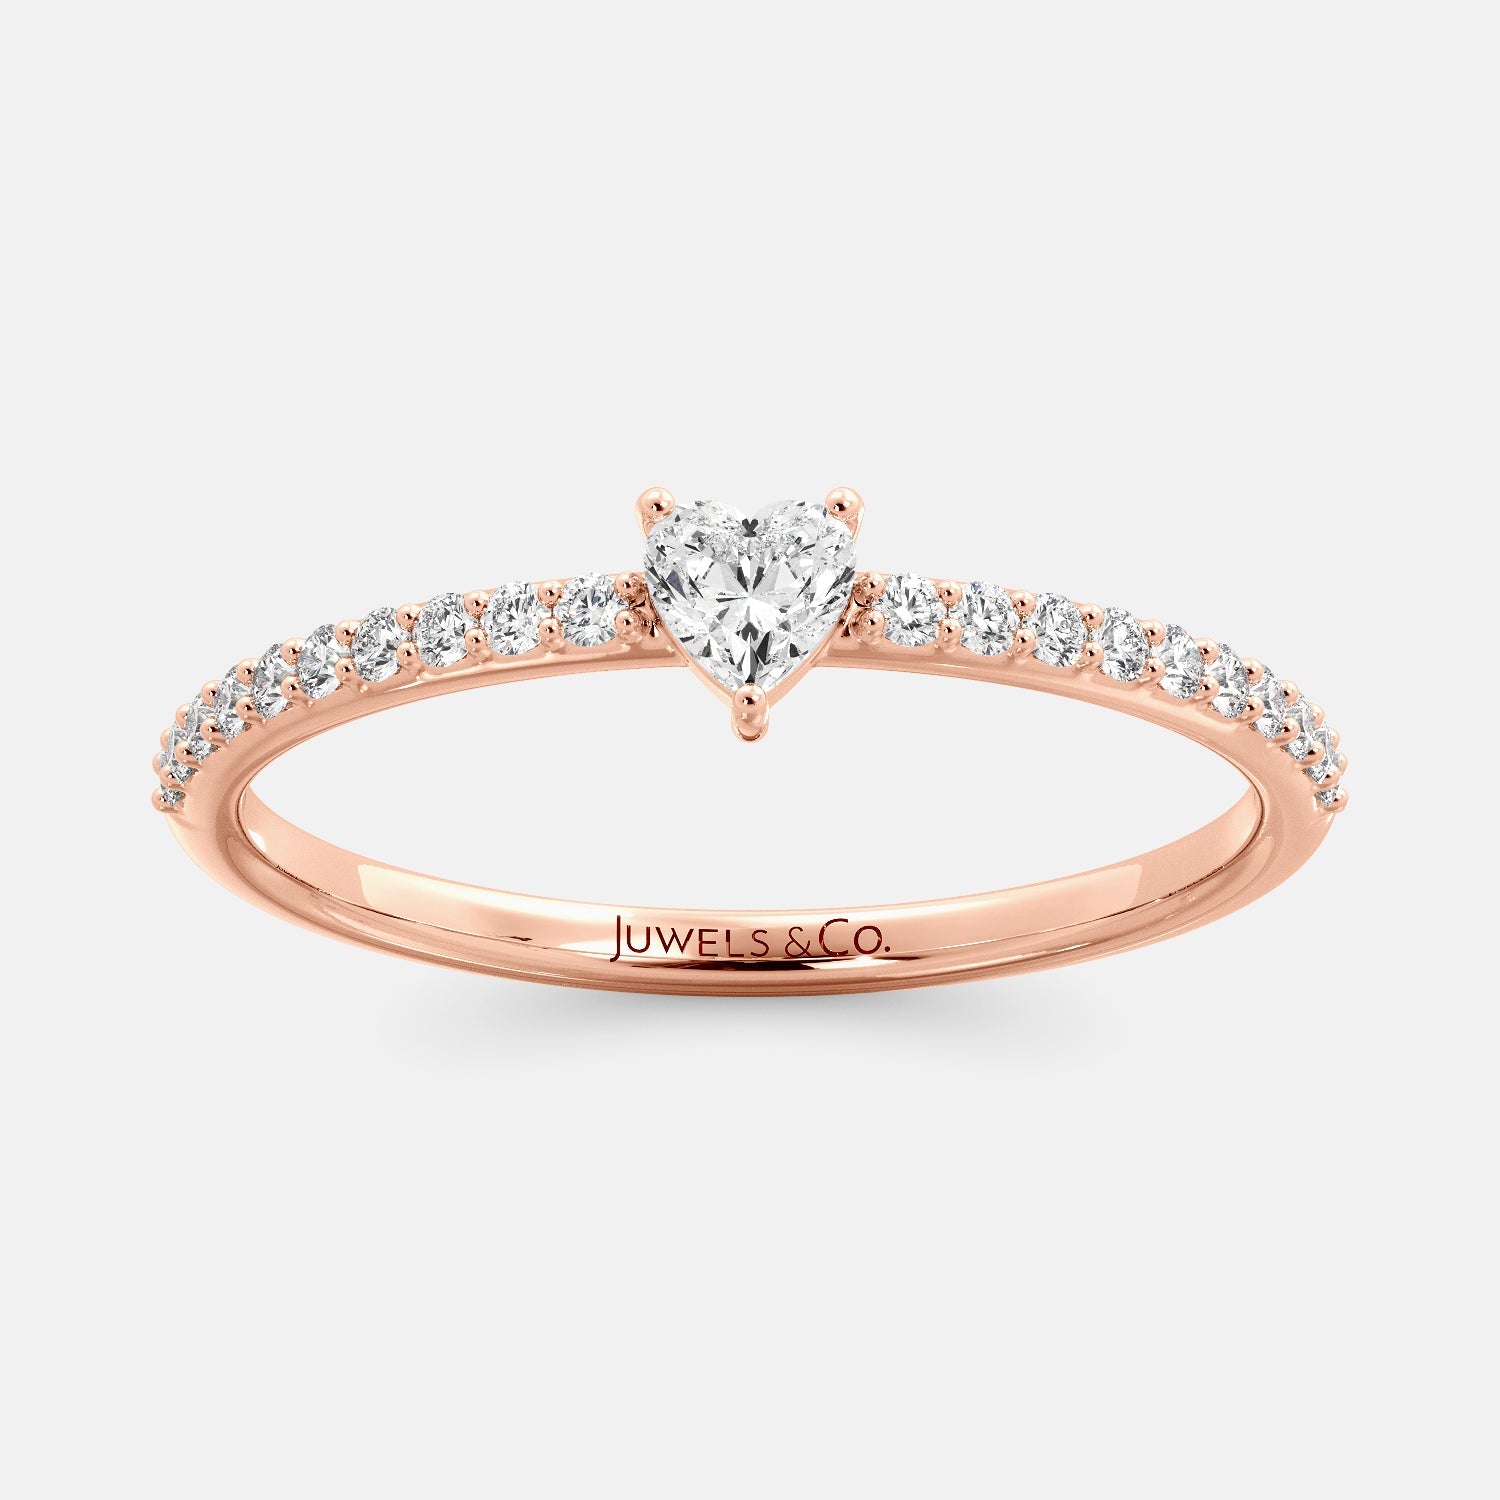 A close-up of a heart-shaped diamond ring with side stones in recycled rose gold. The ring is set with a single, large diamond in the center of a heart-shaped setting. The ring is made of recycled yellow gold and has a simple, elegant design. The diamond is sparkling and reflects light beautifully. The side stones are smaller diamonds that are set in the band of the ring. The ring is a perfect gift for a loved one or a special occasion.